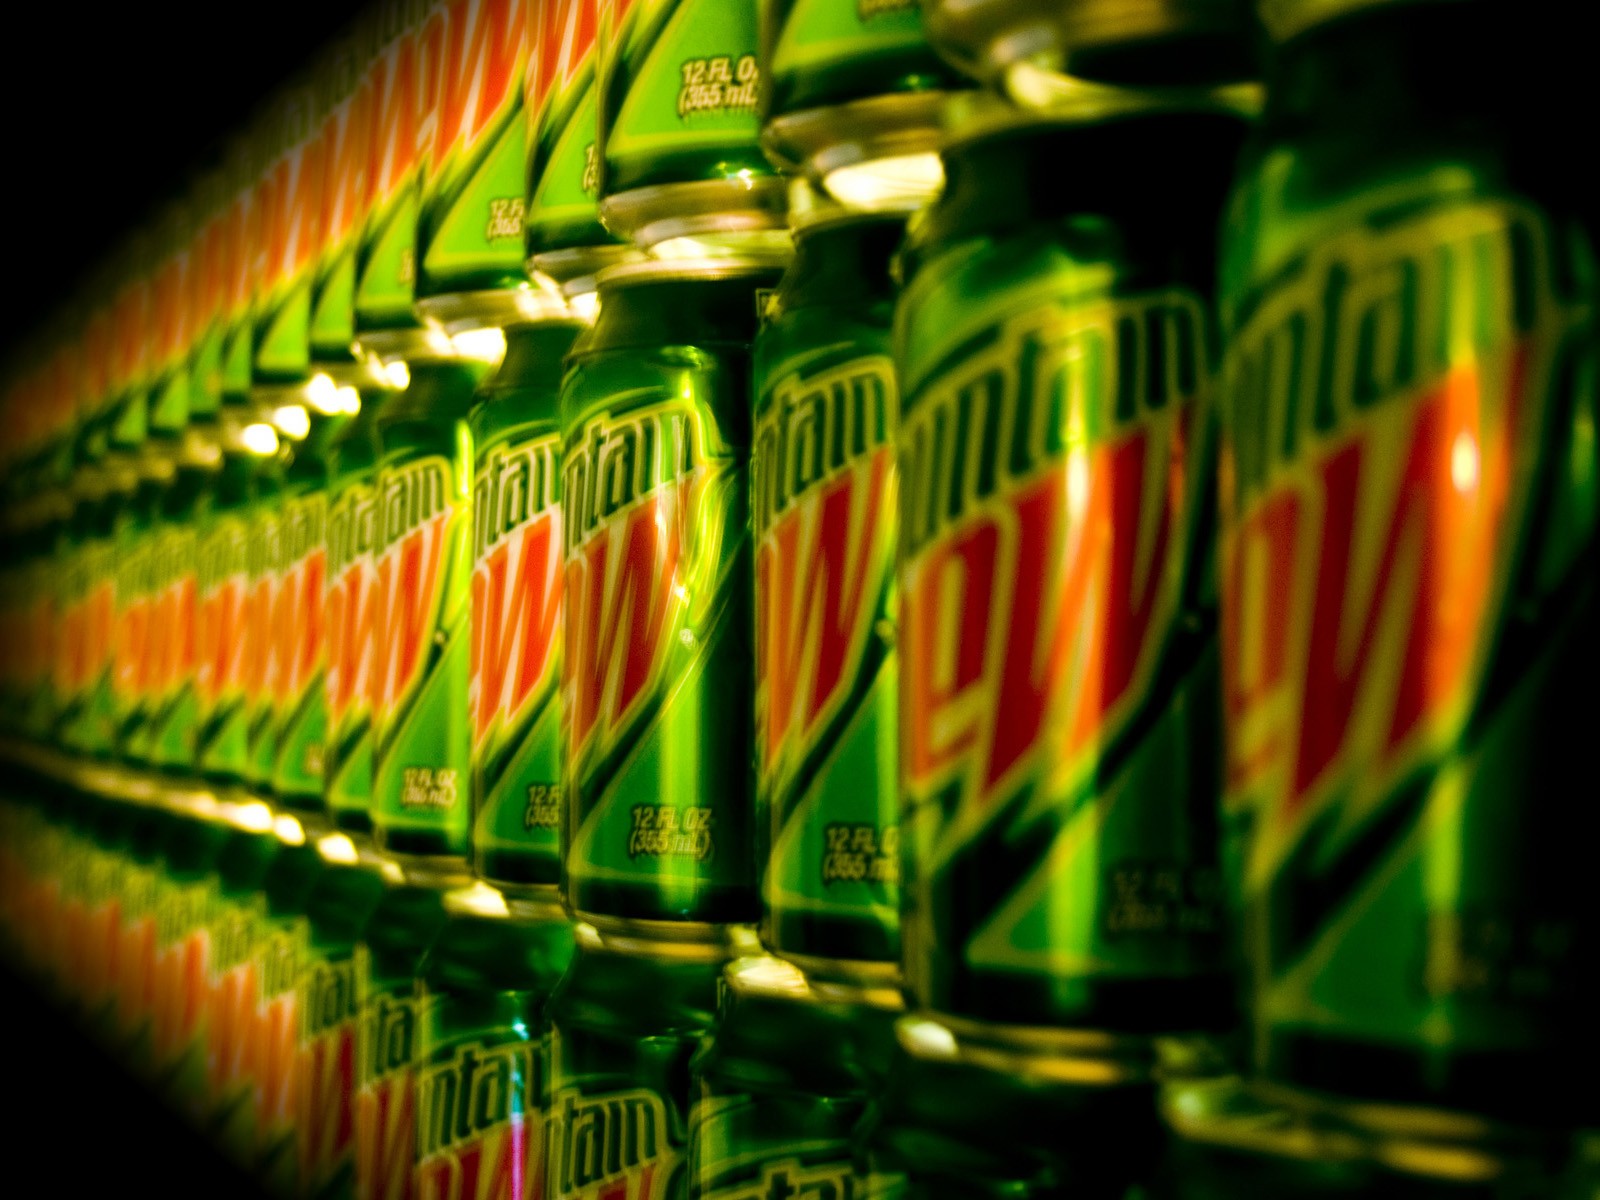 General 1600x1200 Mountain Dew can green red soda brand